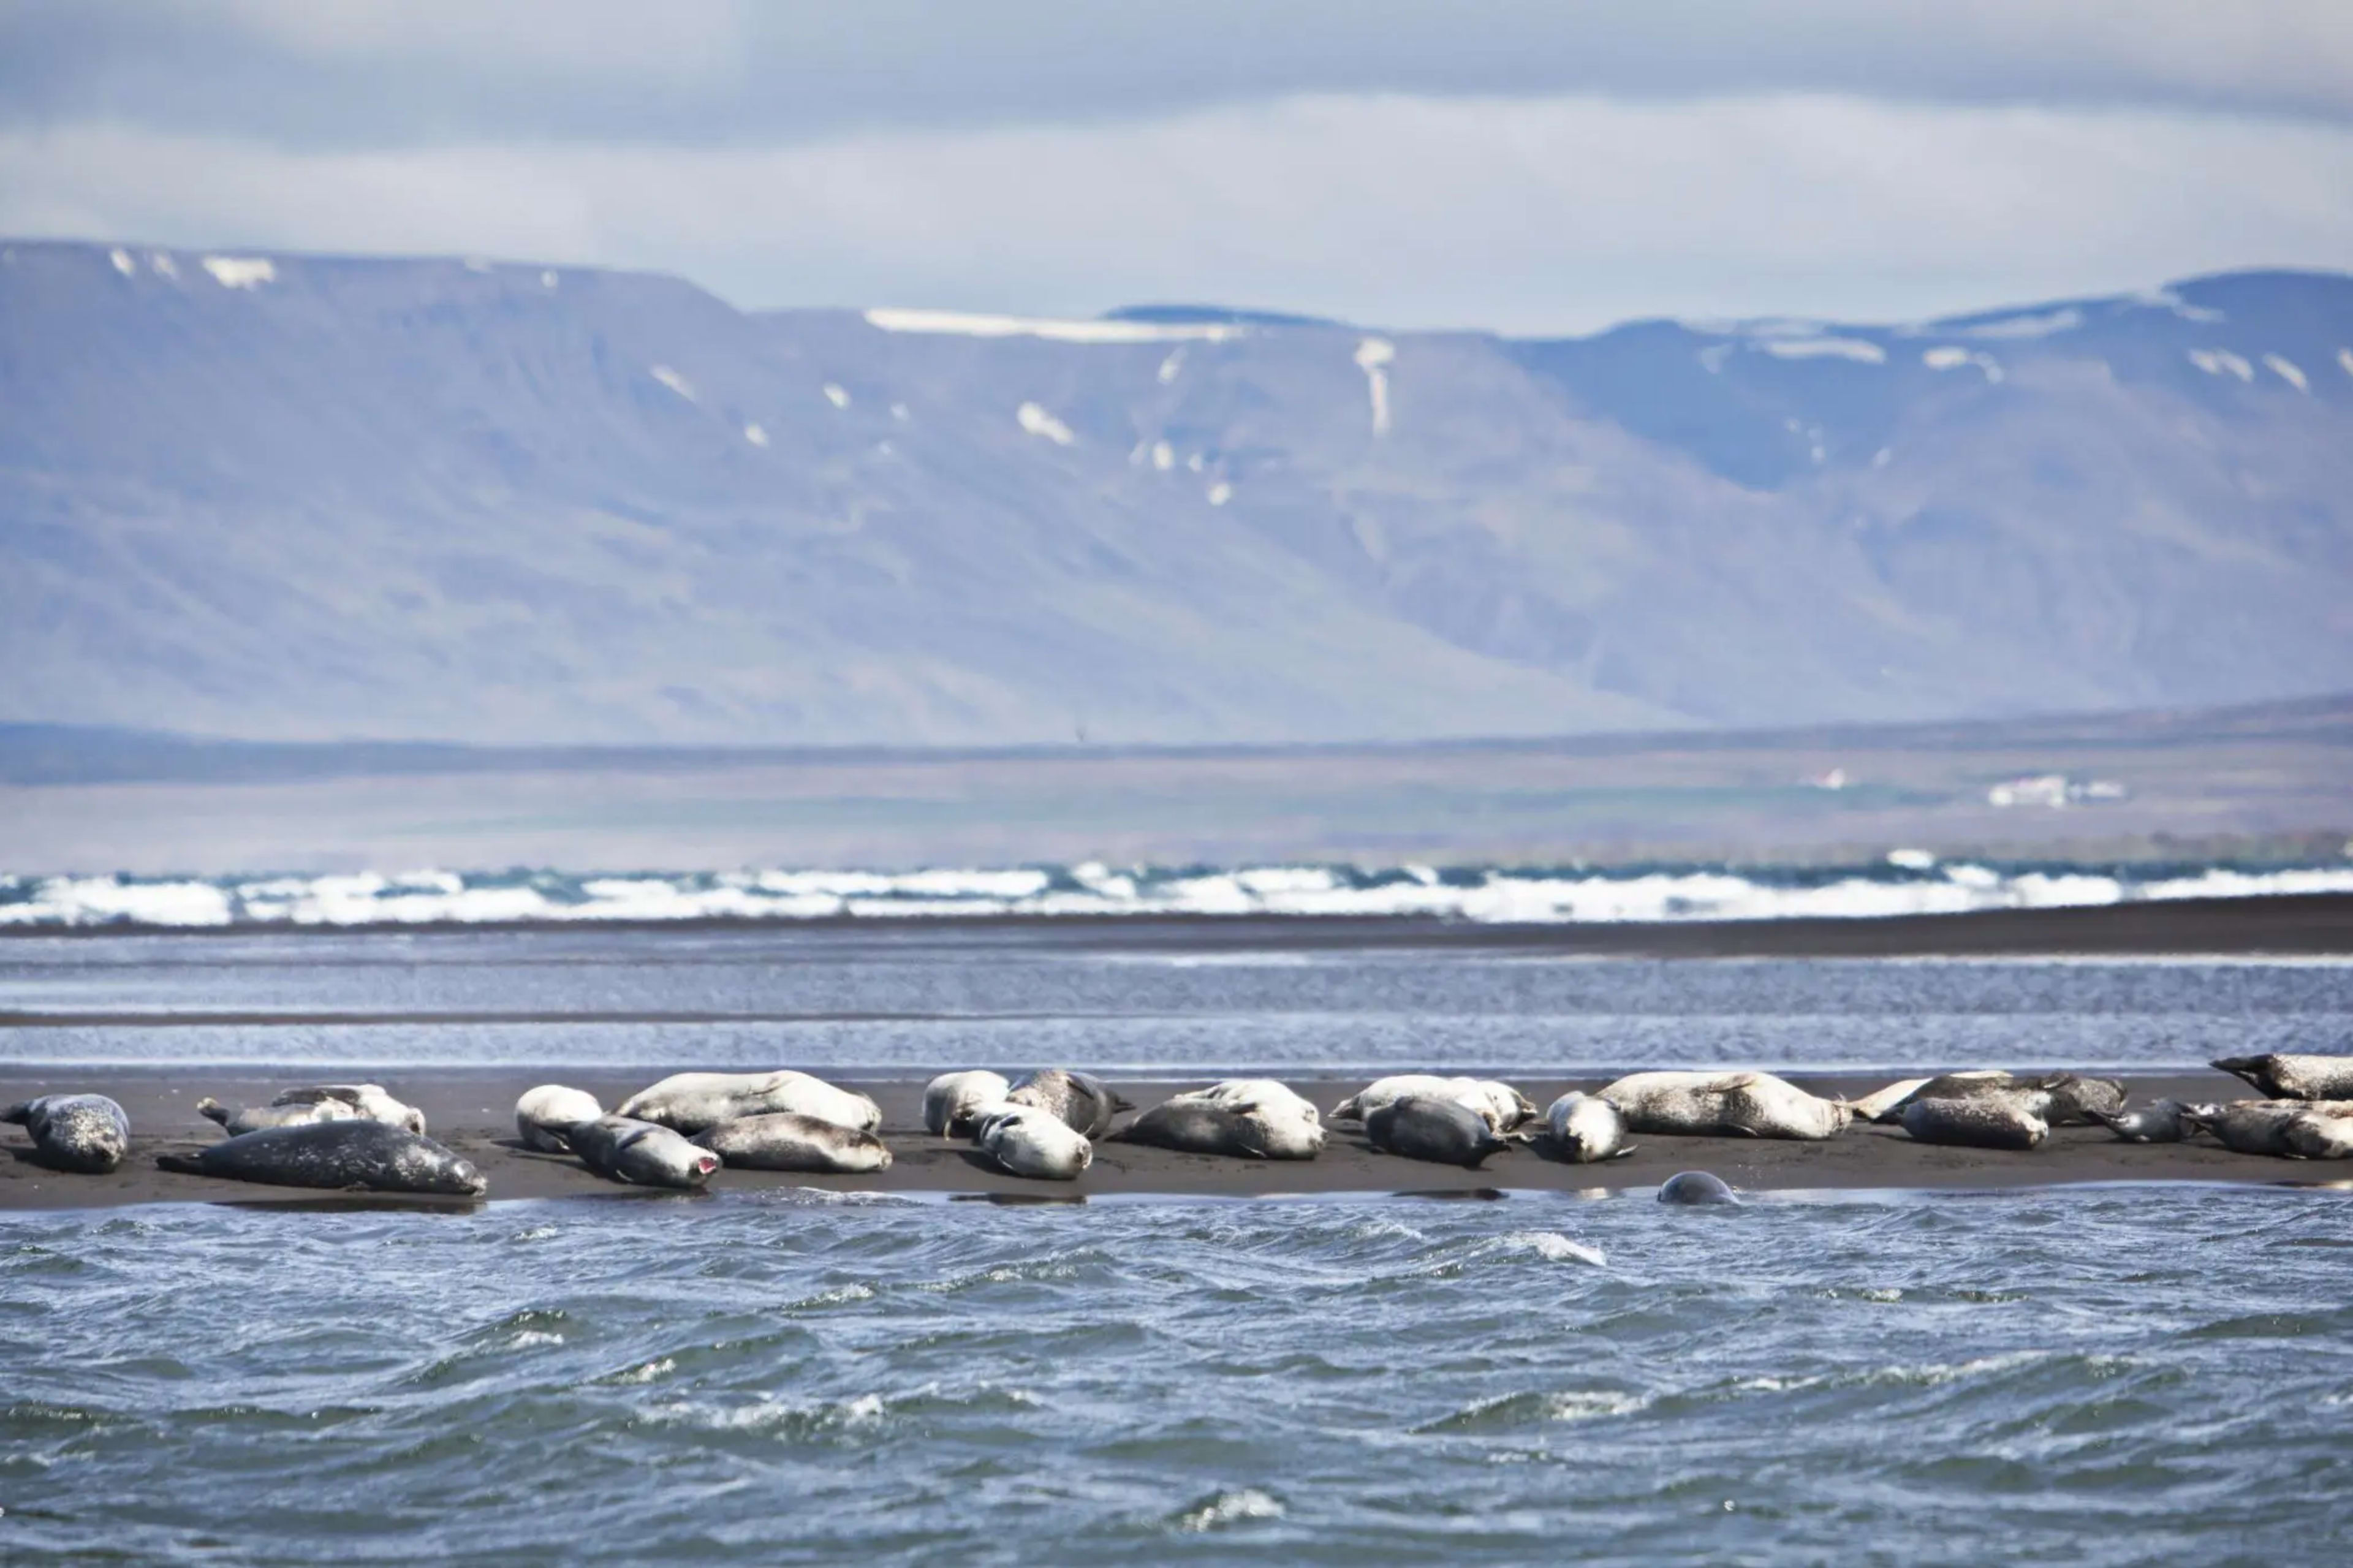 group of seals laying on sand strand with snowy mountains in background